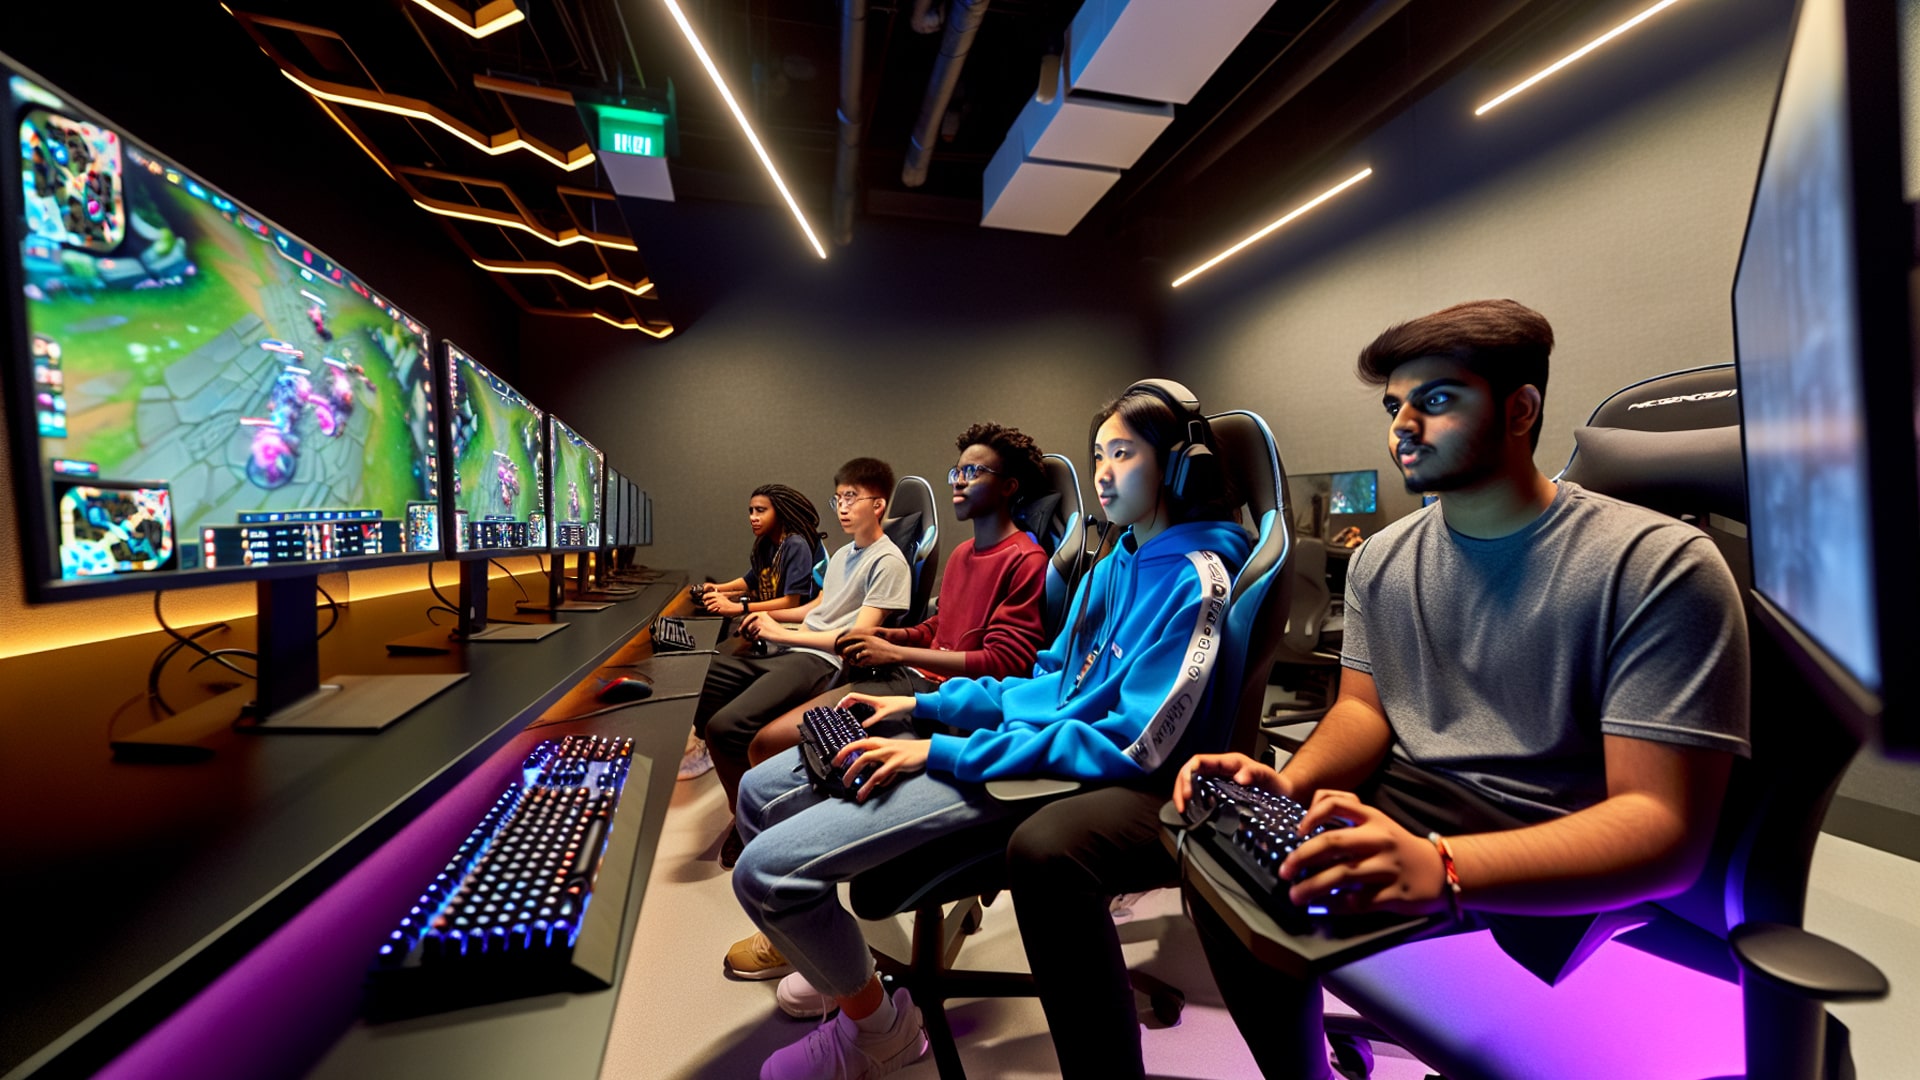 Students at UC Irvine competing in a League of Legends esports match